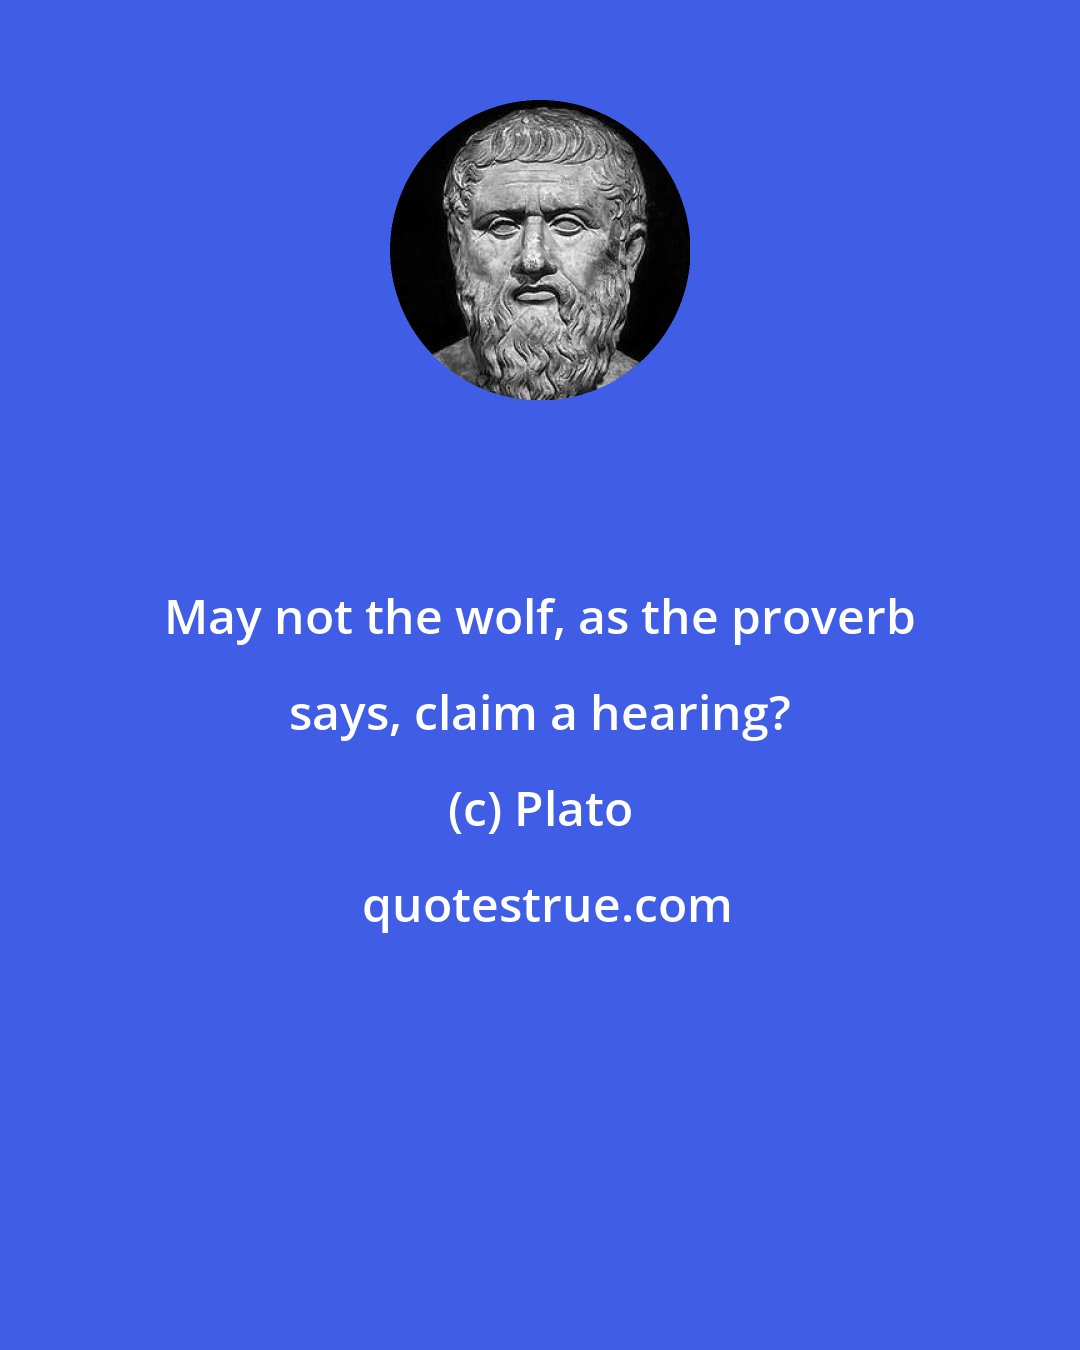 Plato: May not the wolf, as the proverb says, claim a hearing?